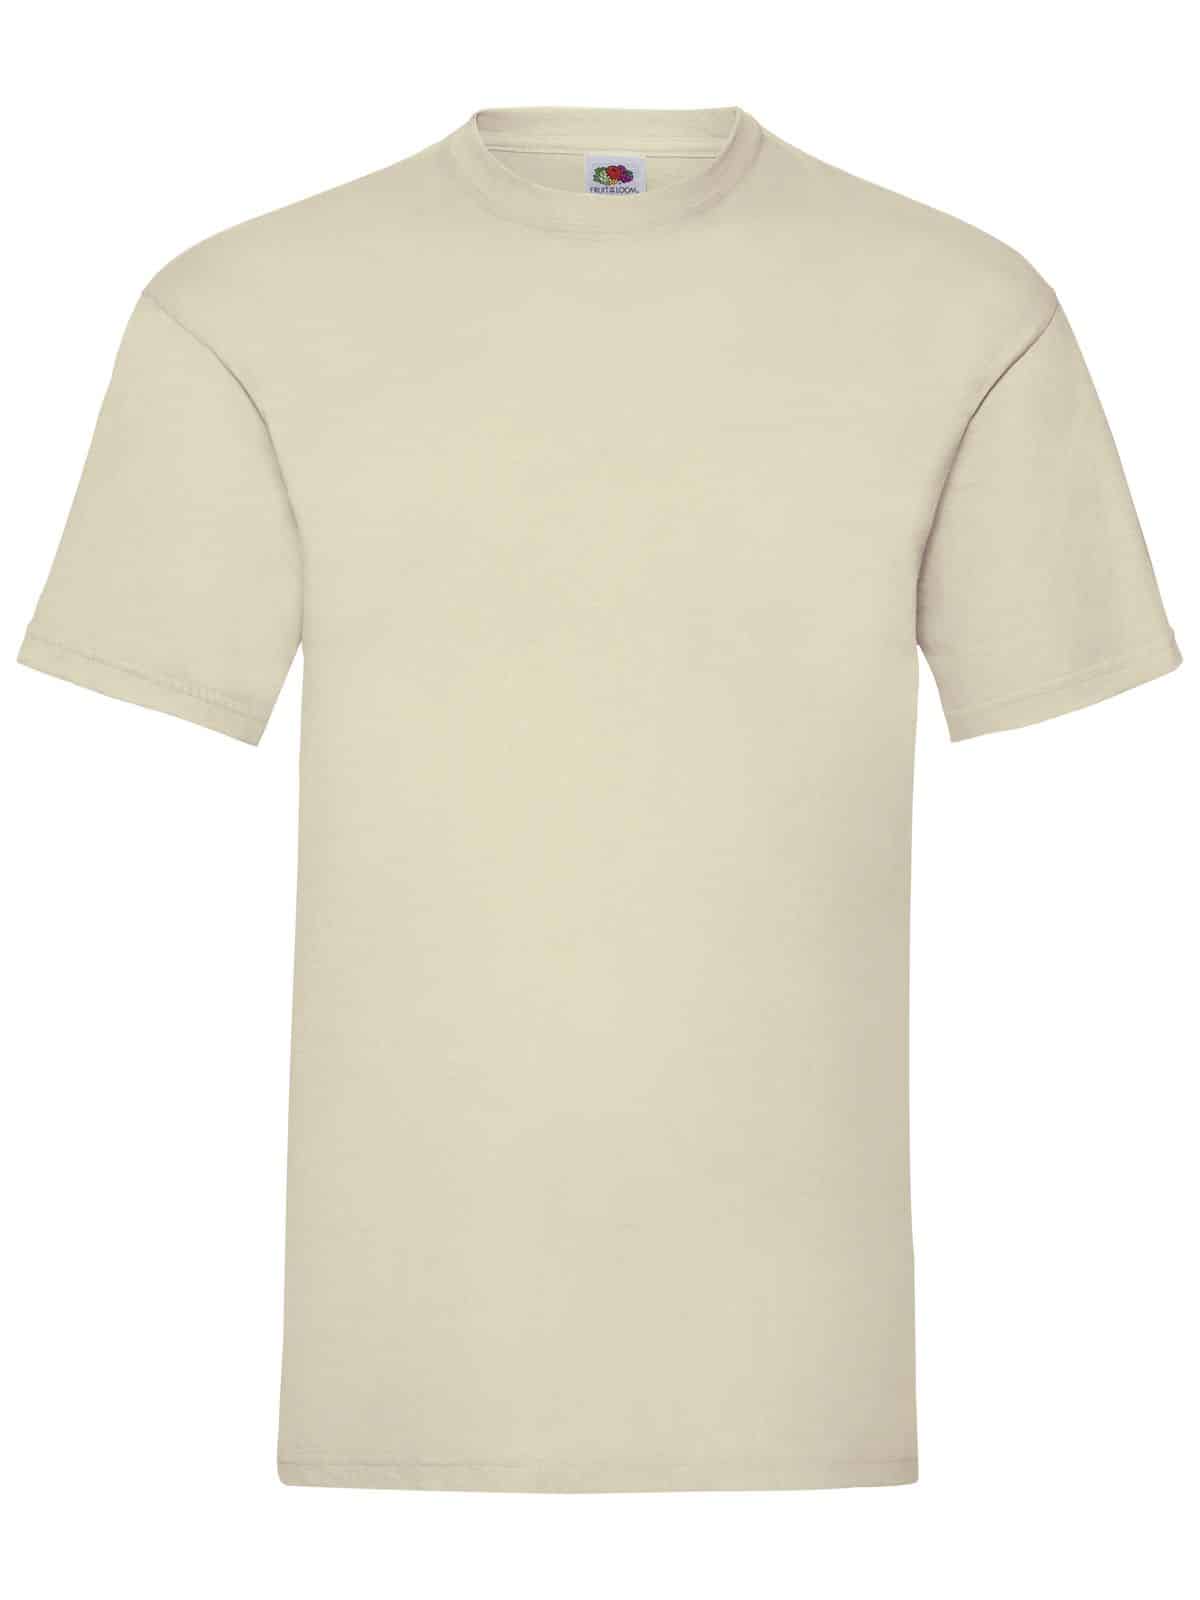 T-SHIRT MANICA CORTA | UOMO FR610360 gr/m2 | VALUEWEIGHT | | | BIANCA 100% THE | NATURAL LOOM FRUIT COTONE T - Company Dandy OF | 165